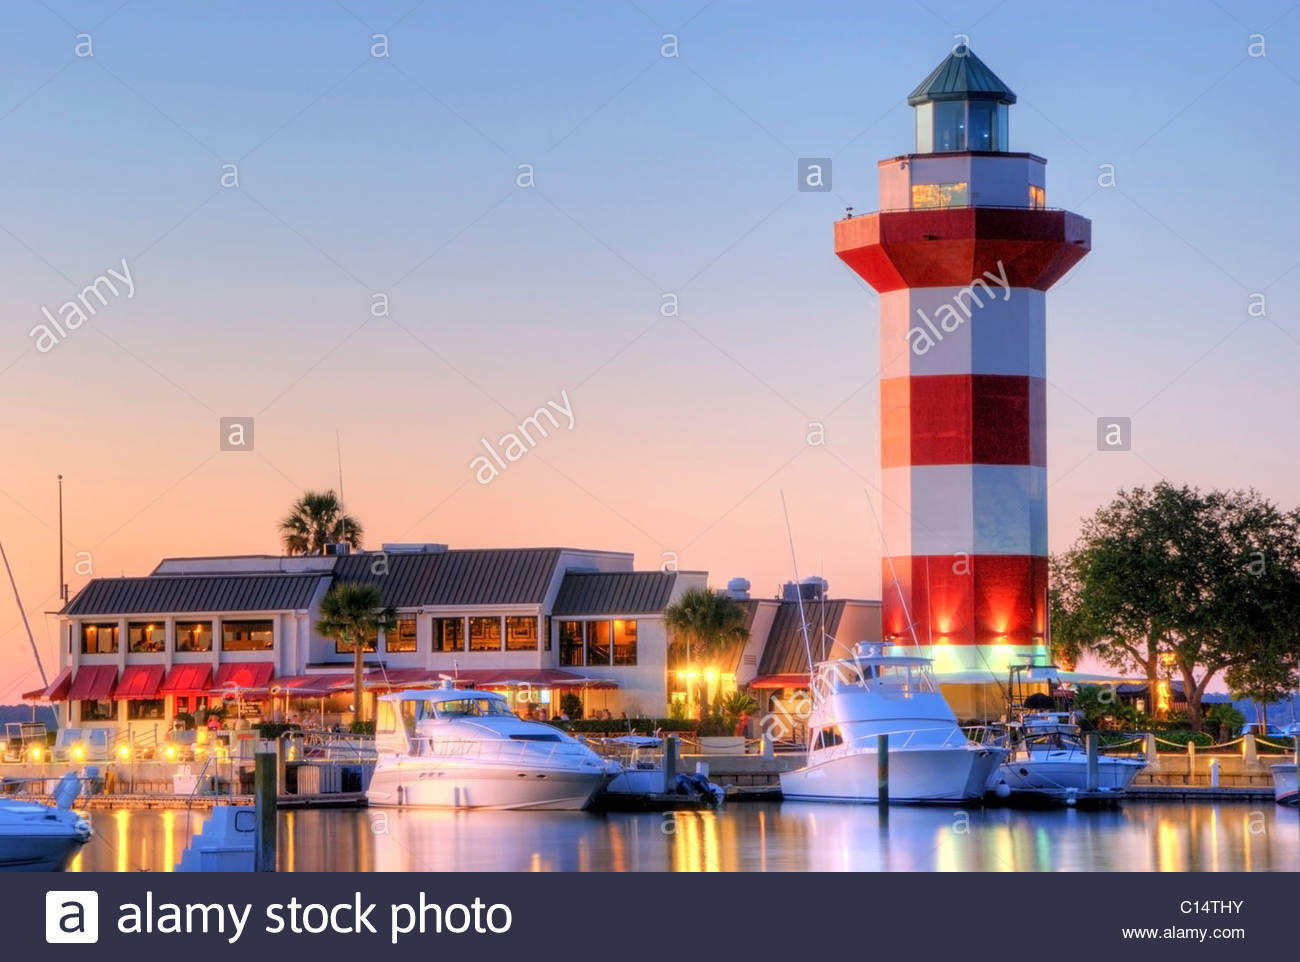 the-famous-harbour-town-lighthouse-at-dusk-on-hilton-head-island-south-c14thy